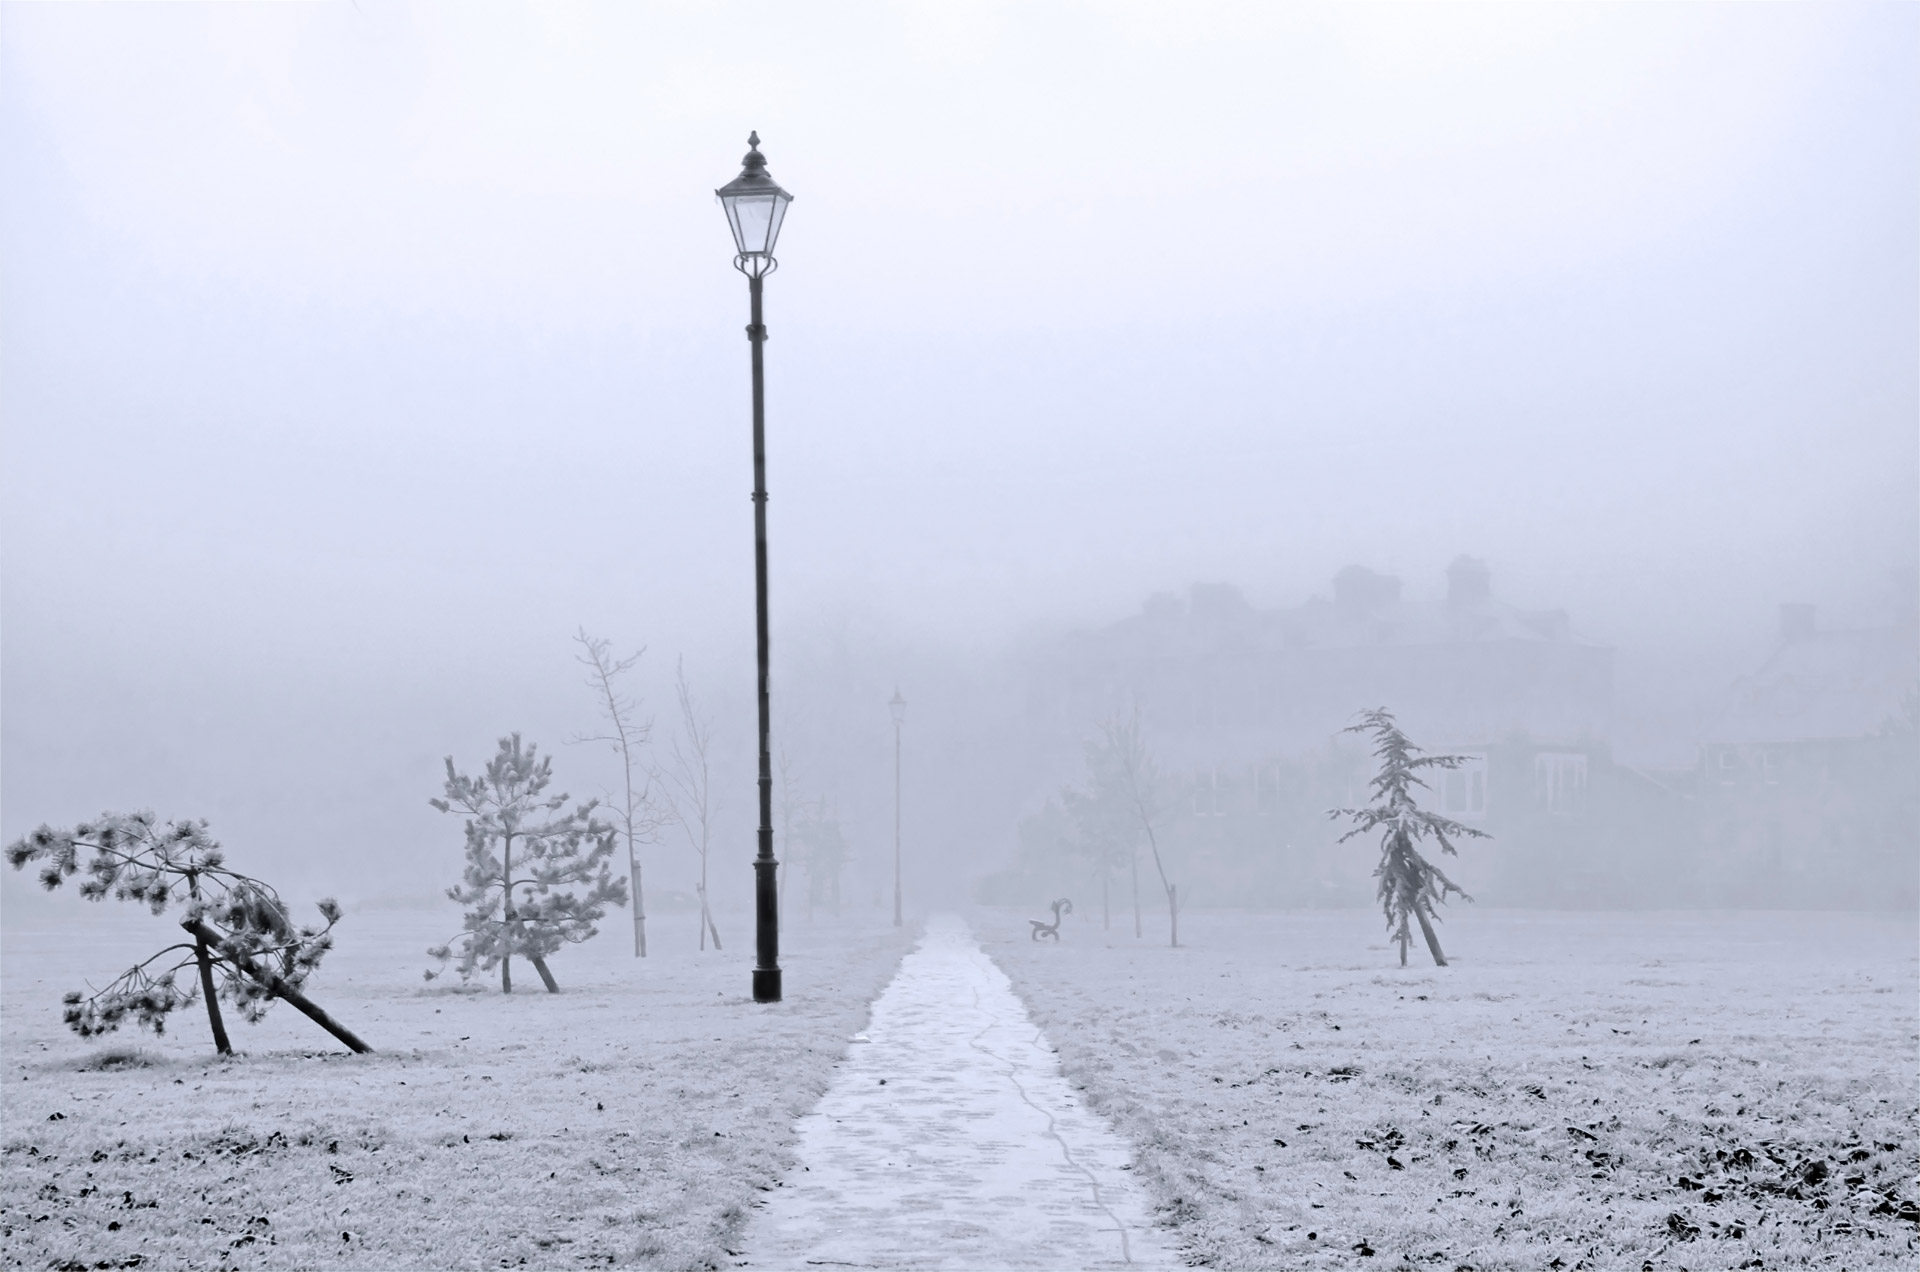 Winter Fog Free Stock Photo Public Domain Pictures